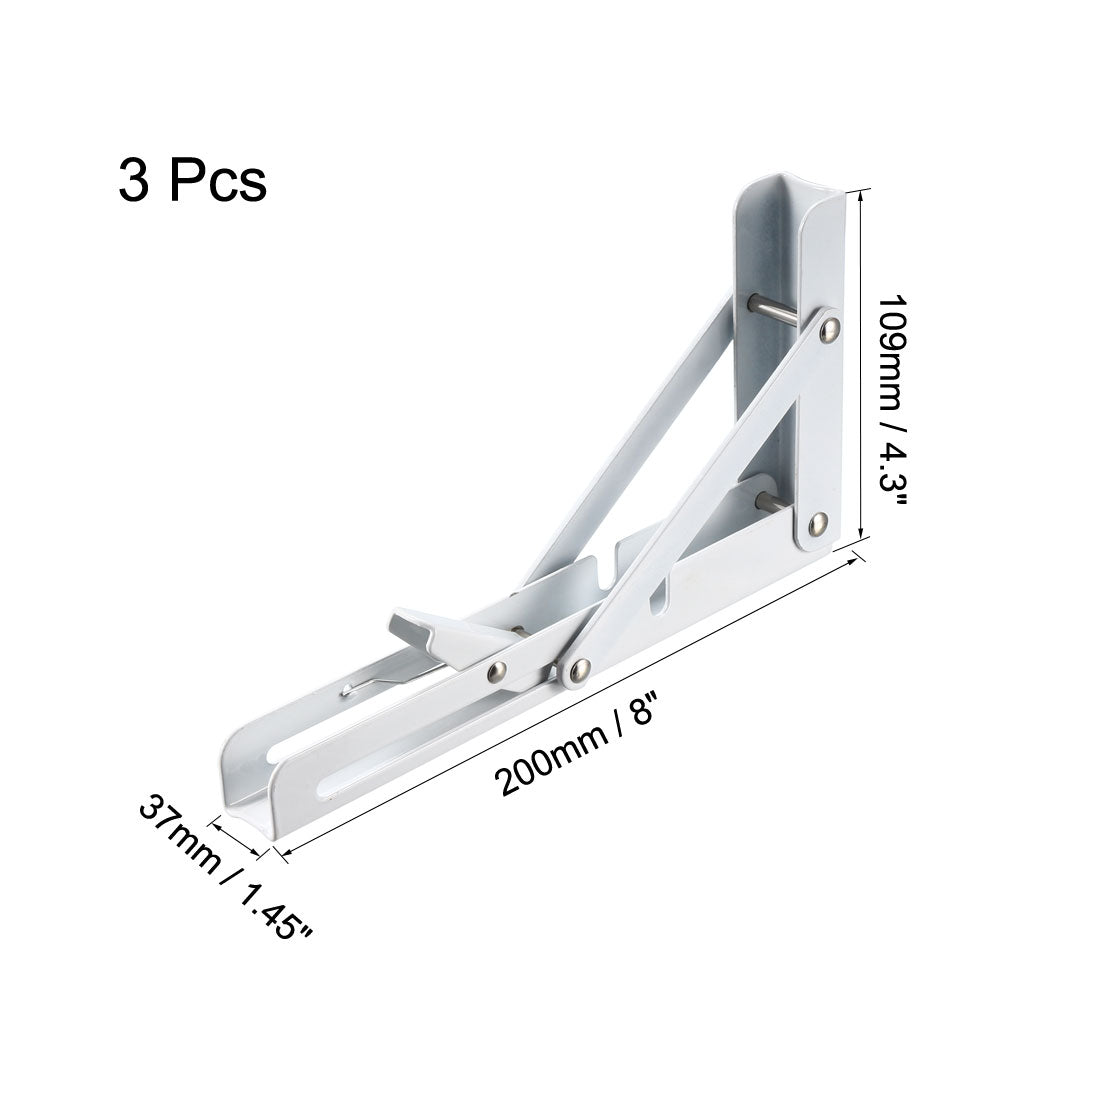 uxcell Uxcell Folding Bracket 8 inch 200mm for Shelf Table Desk Wall Mounted Support Collapsible Long Release Arm Space Saving Carbon Steel 3pcs